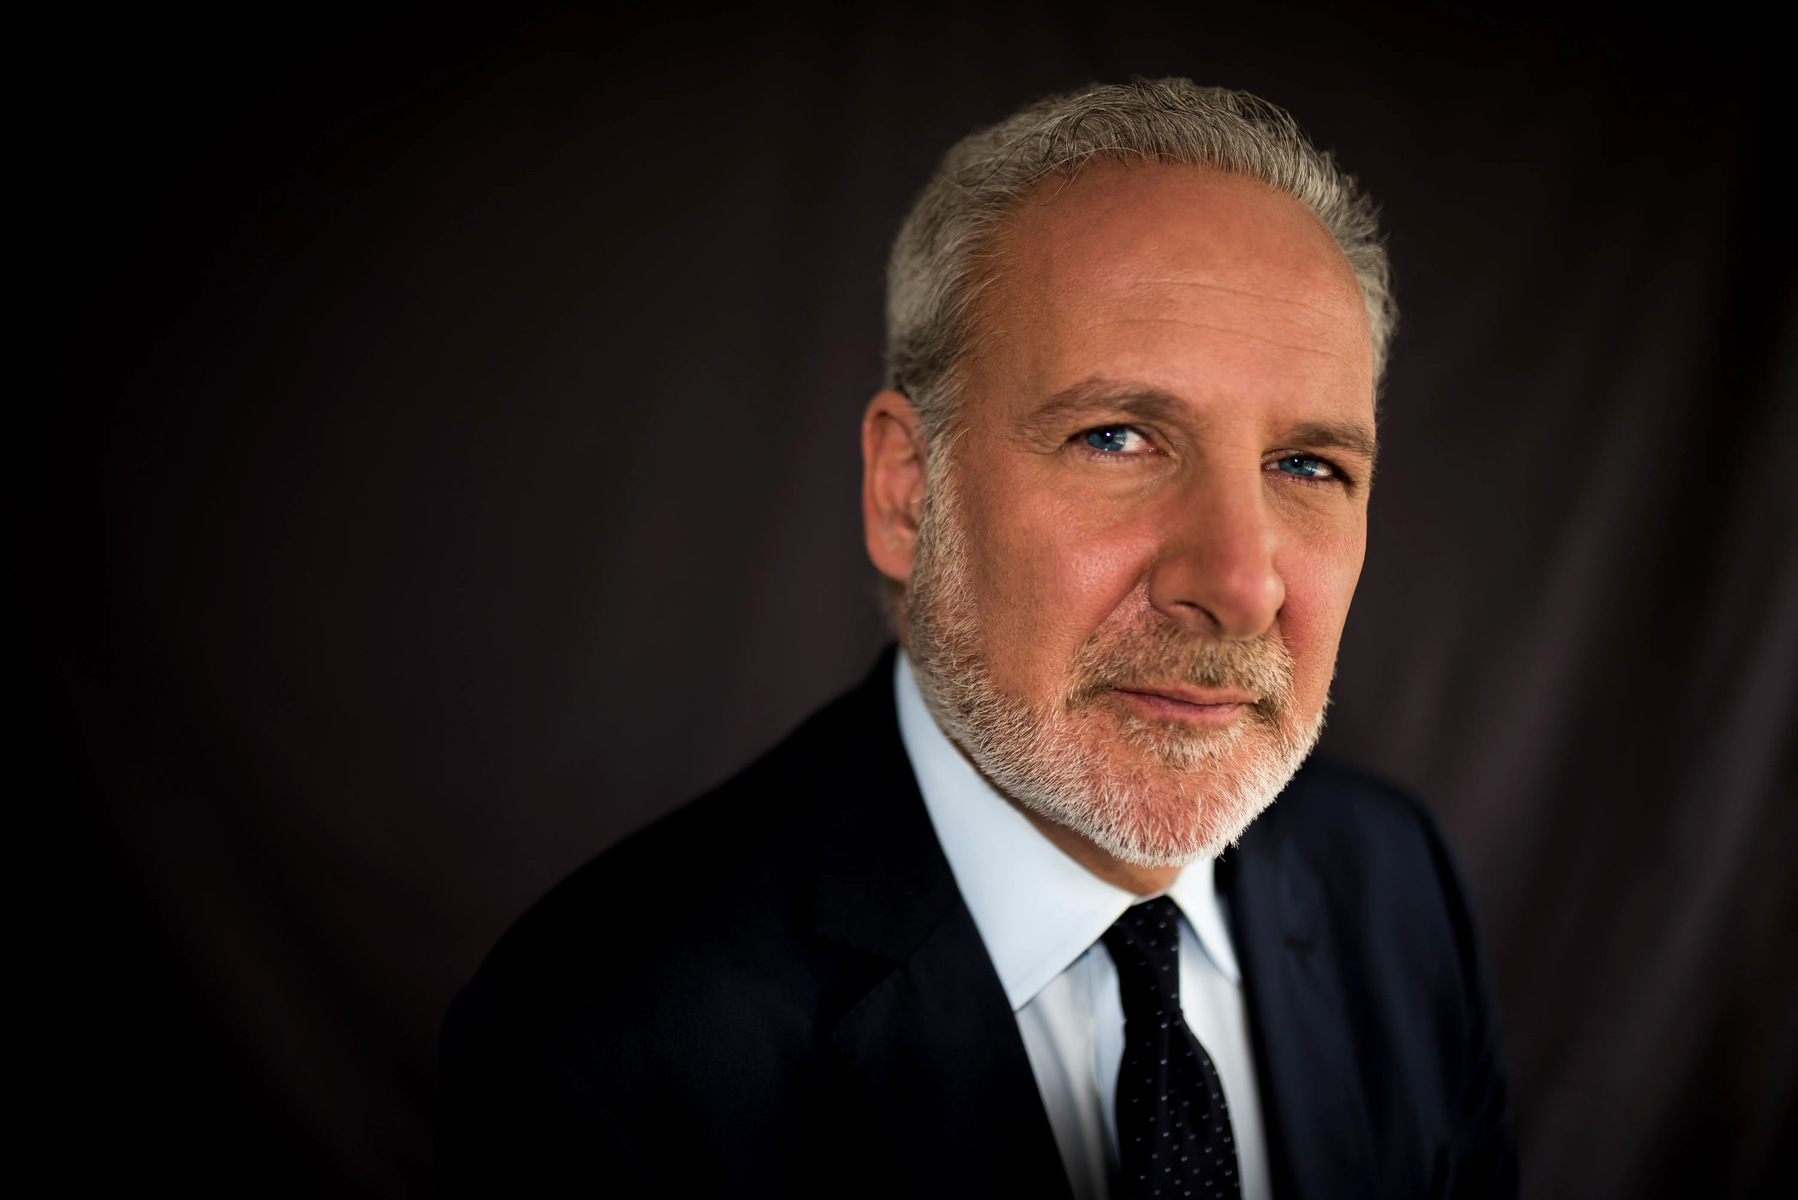 24 Captivating Facts About Peter Schiff - Facts.net